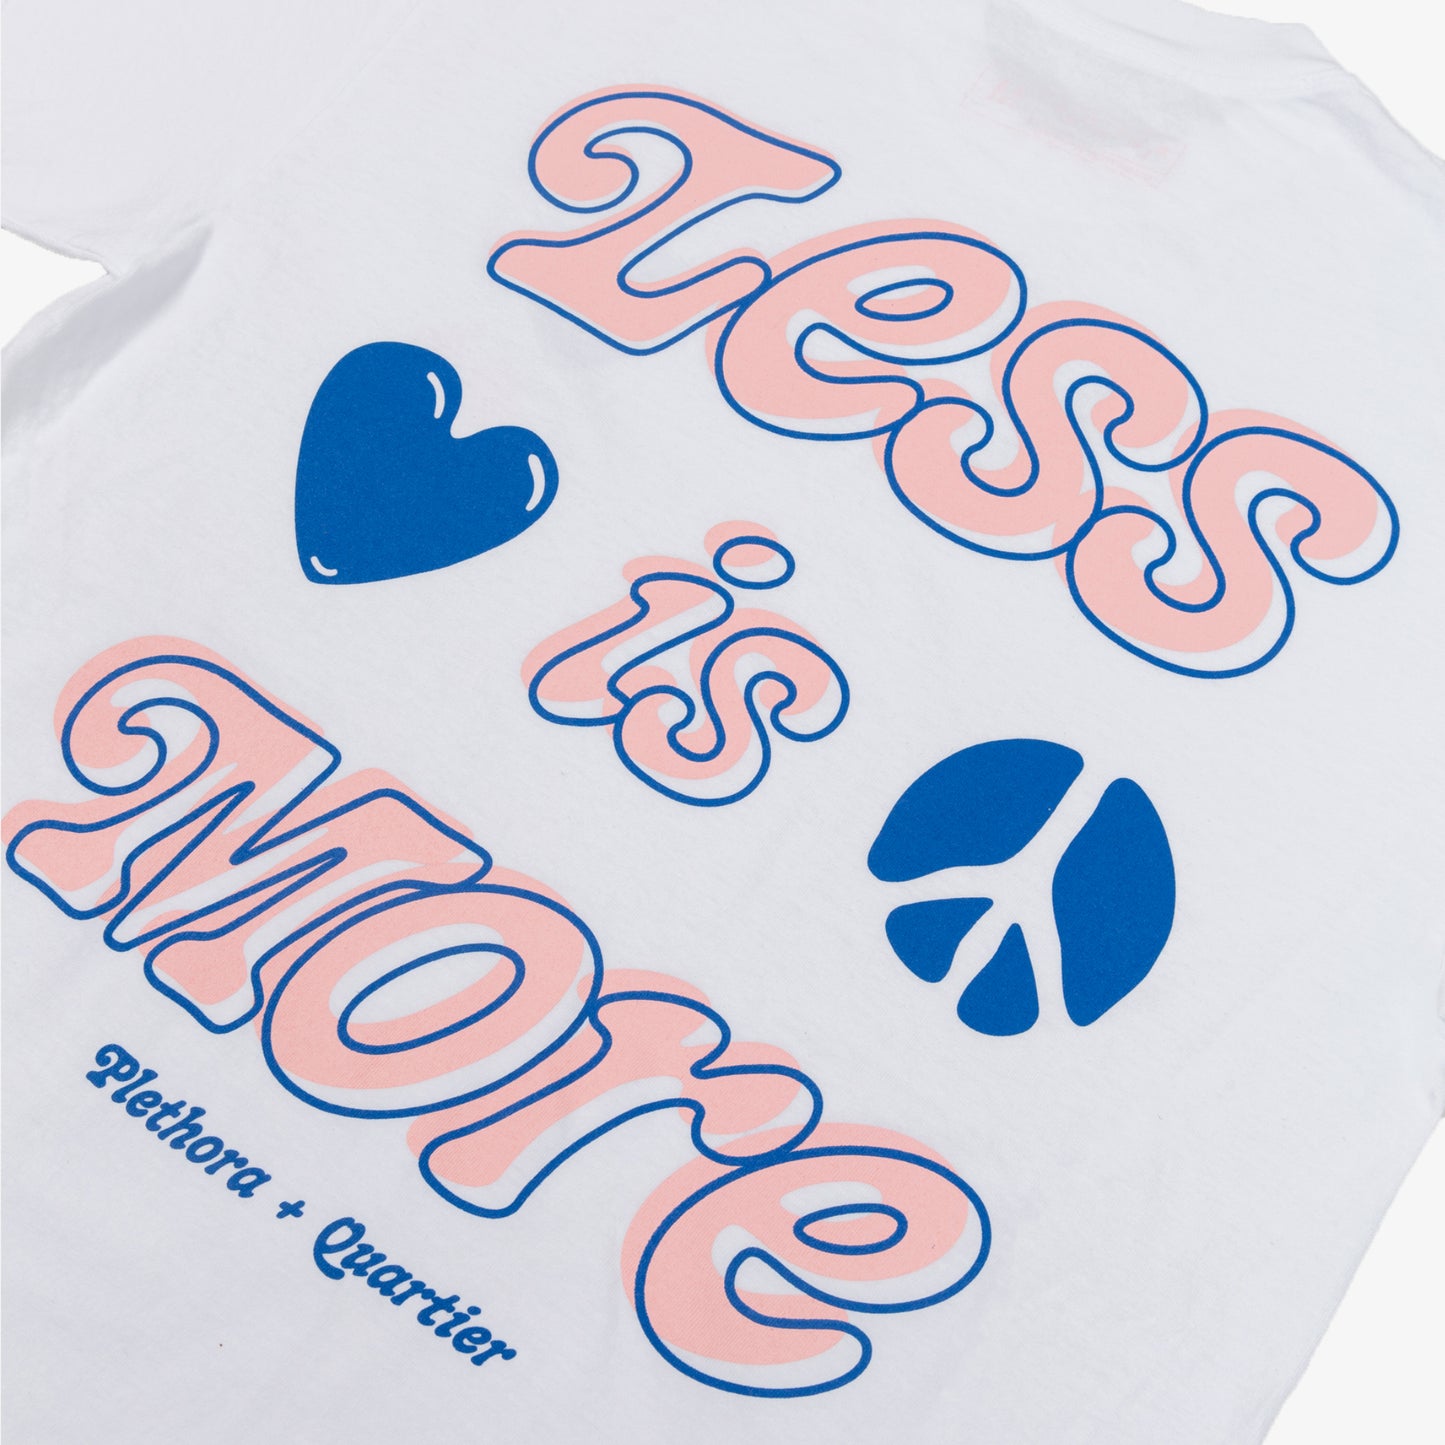 PLETHORA X Quartier Is Home - "Less is More" Tee